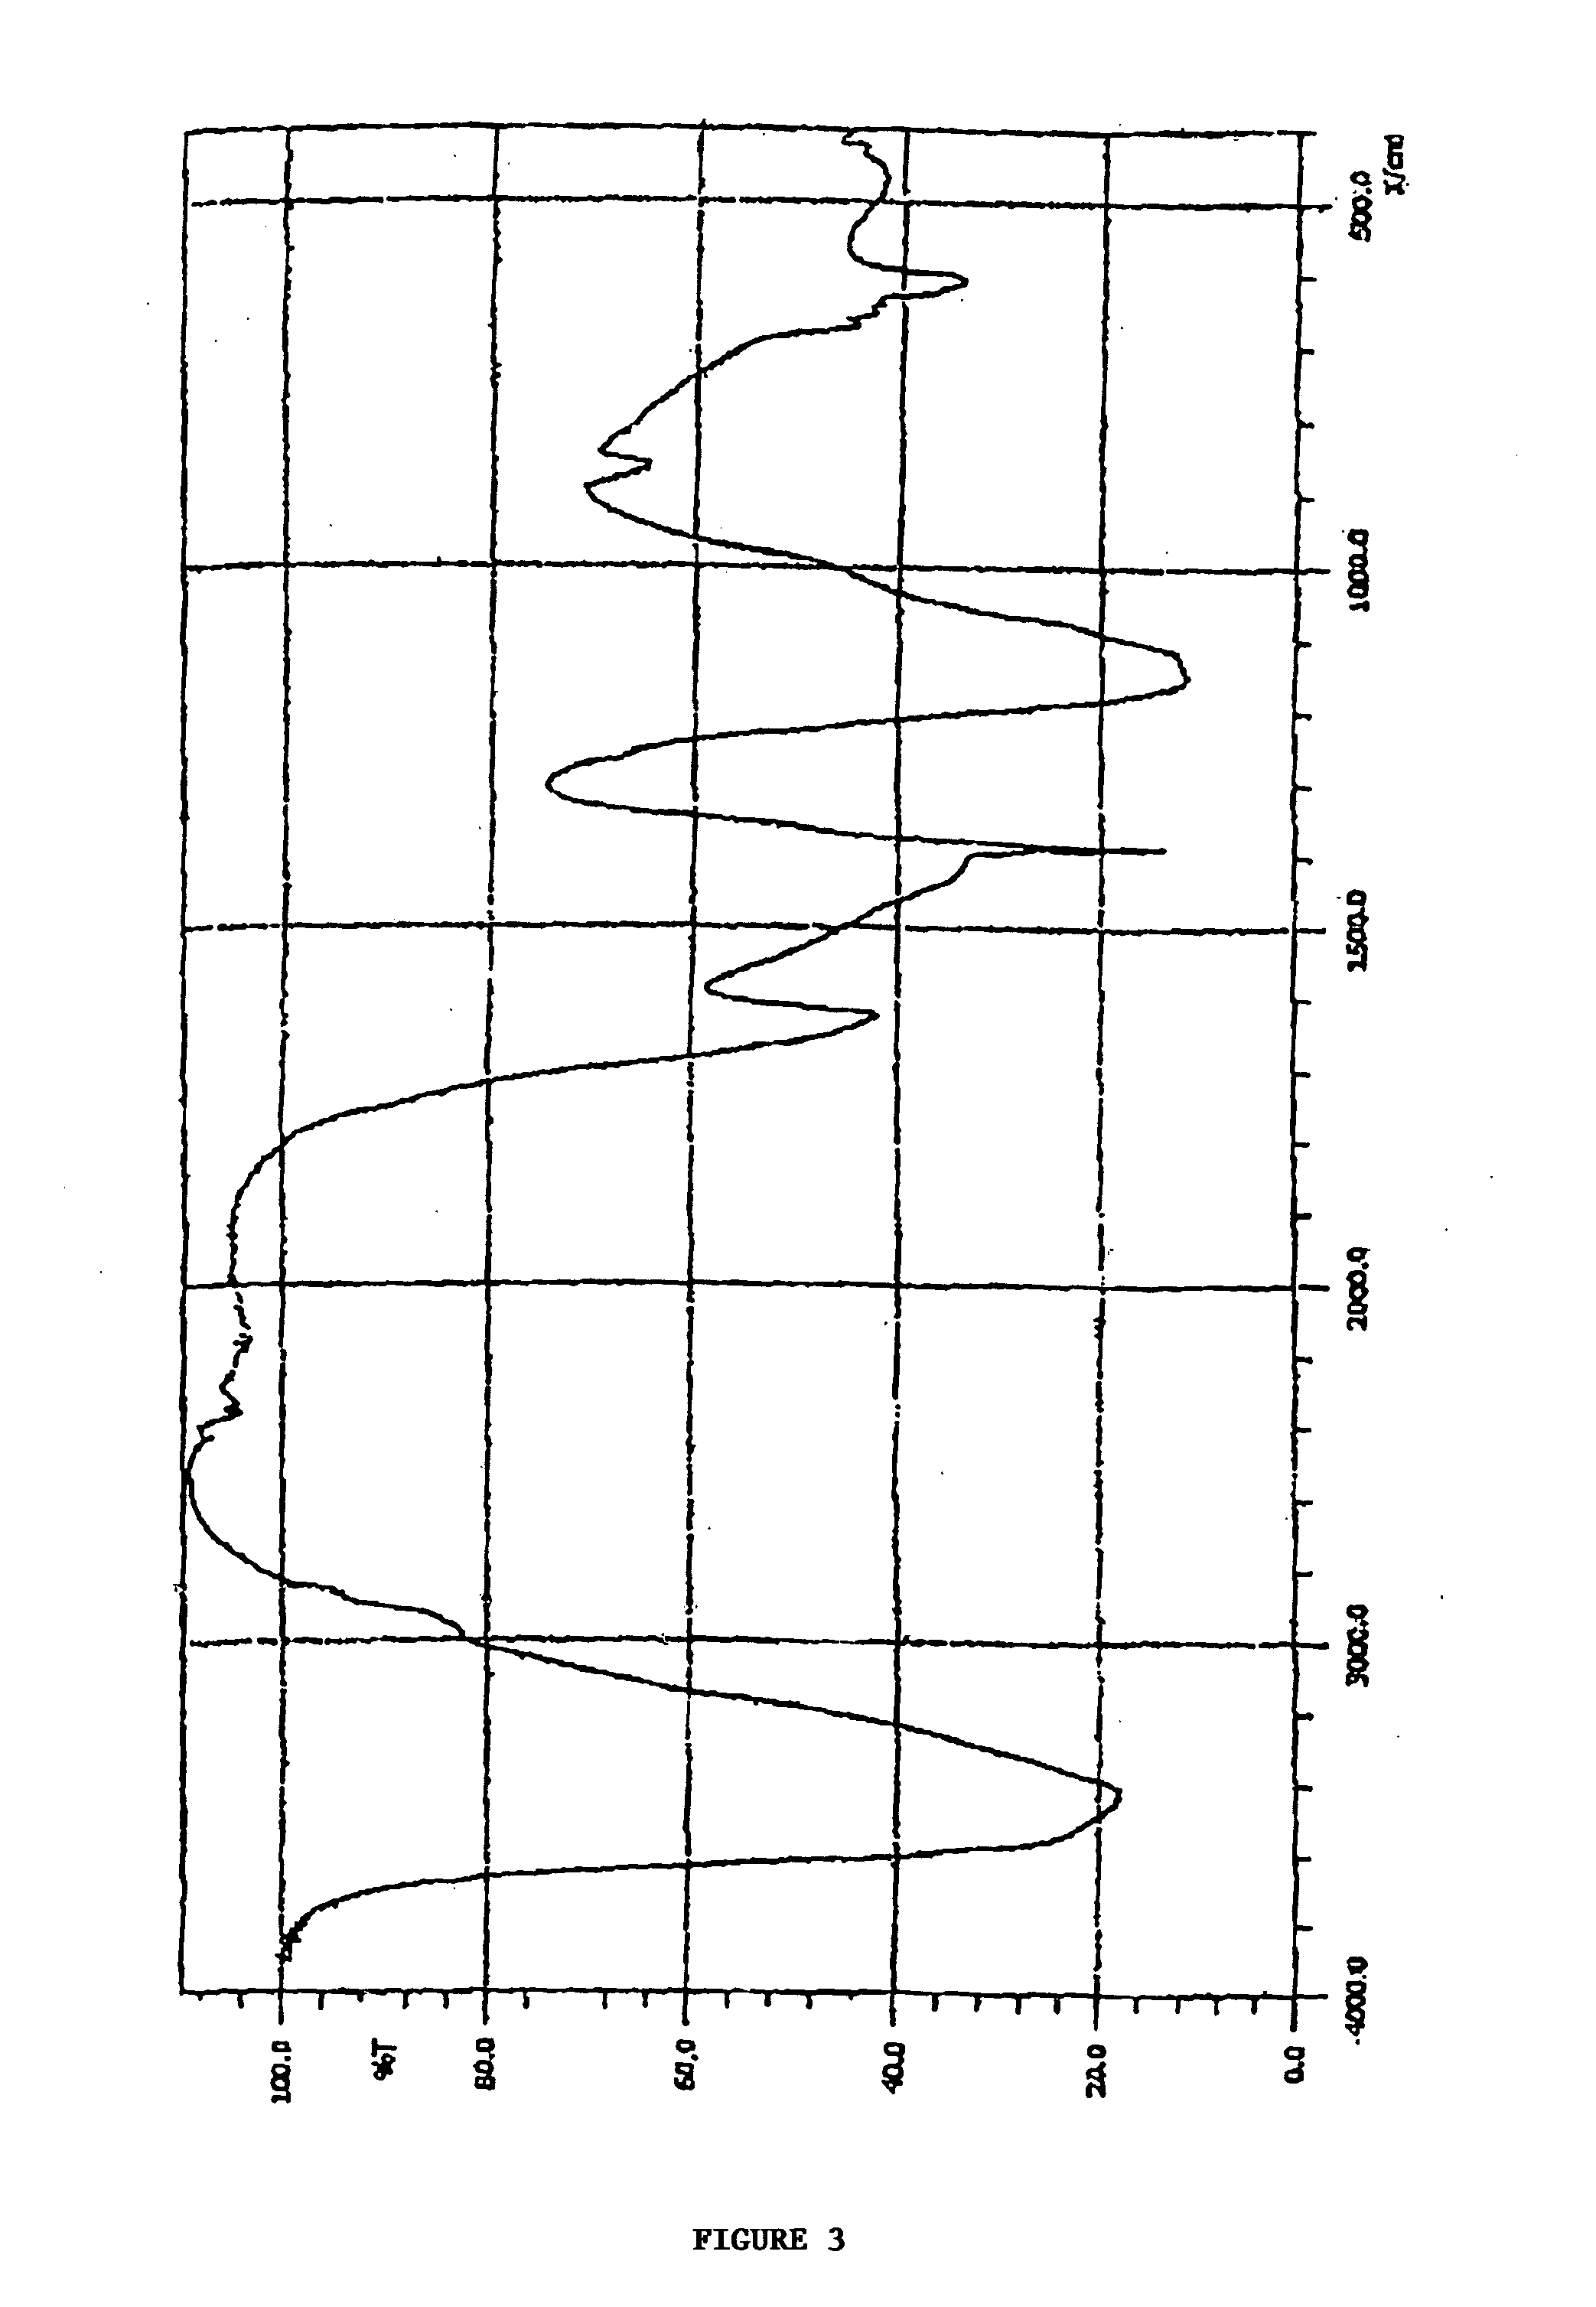 Composition and use of phyto-percolate for treatment of disease